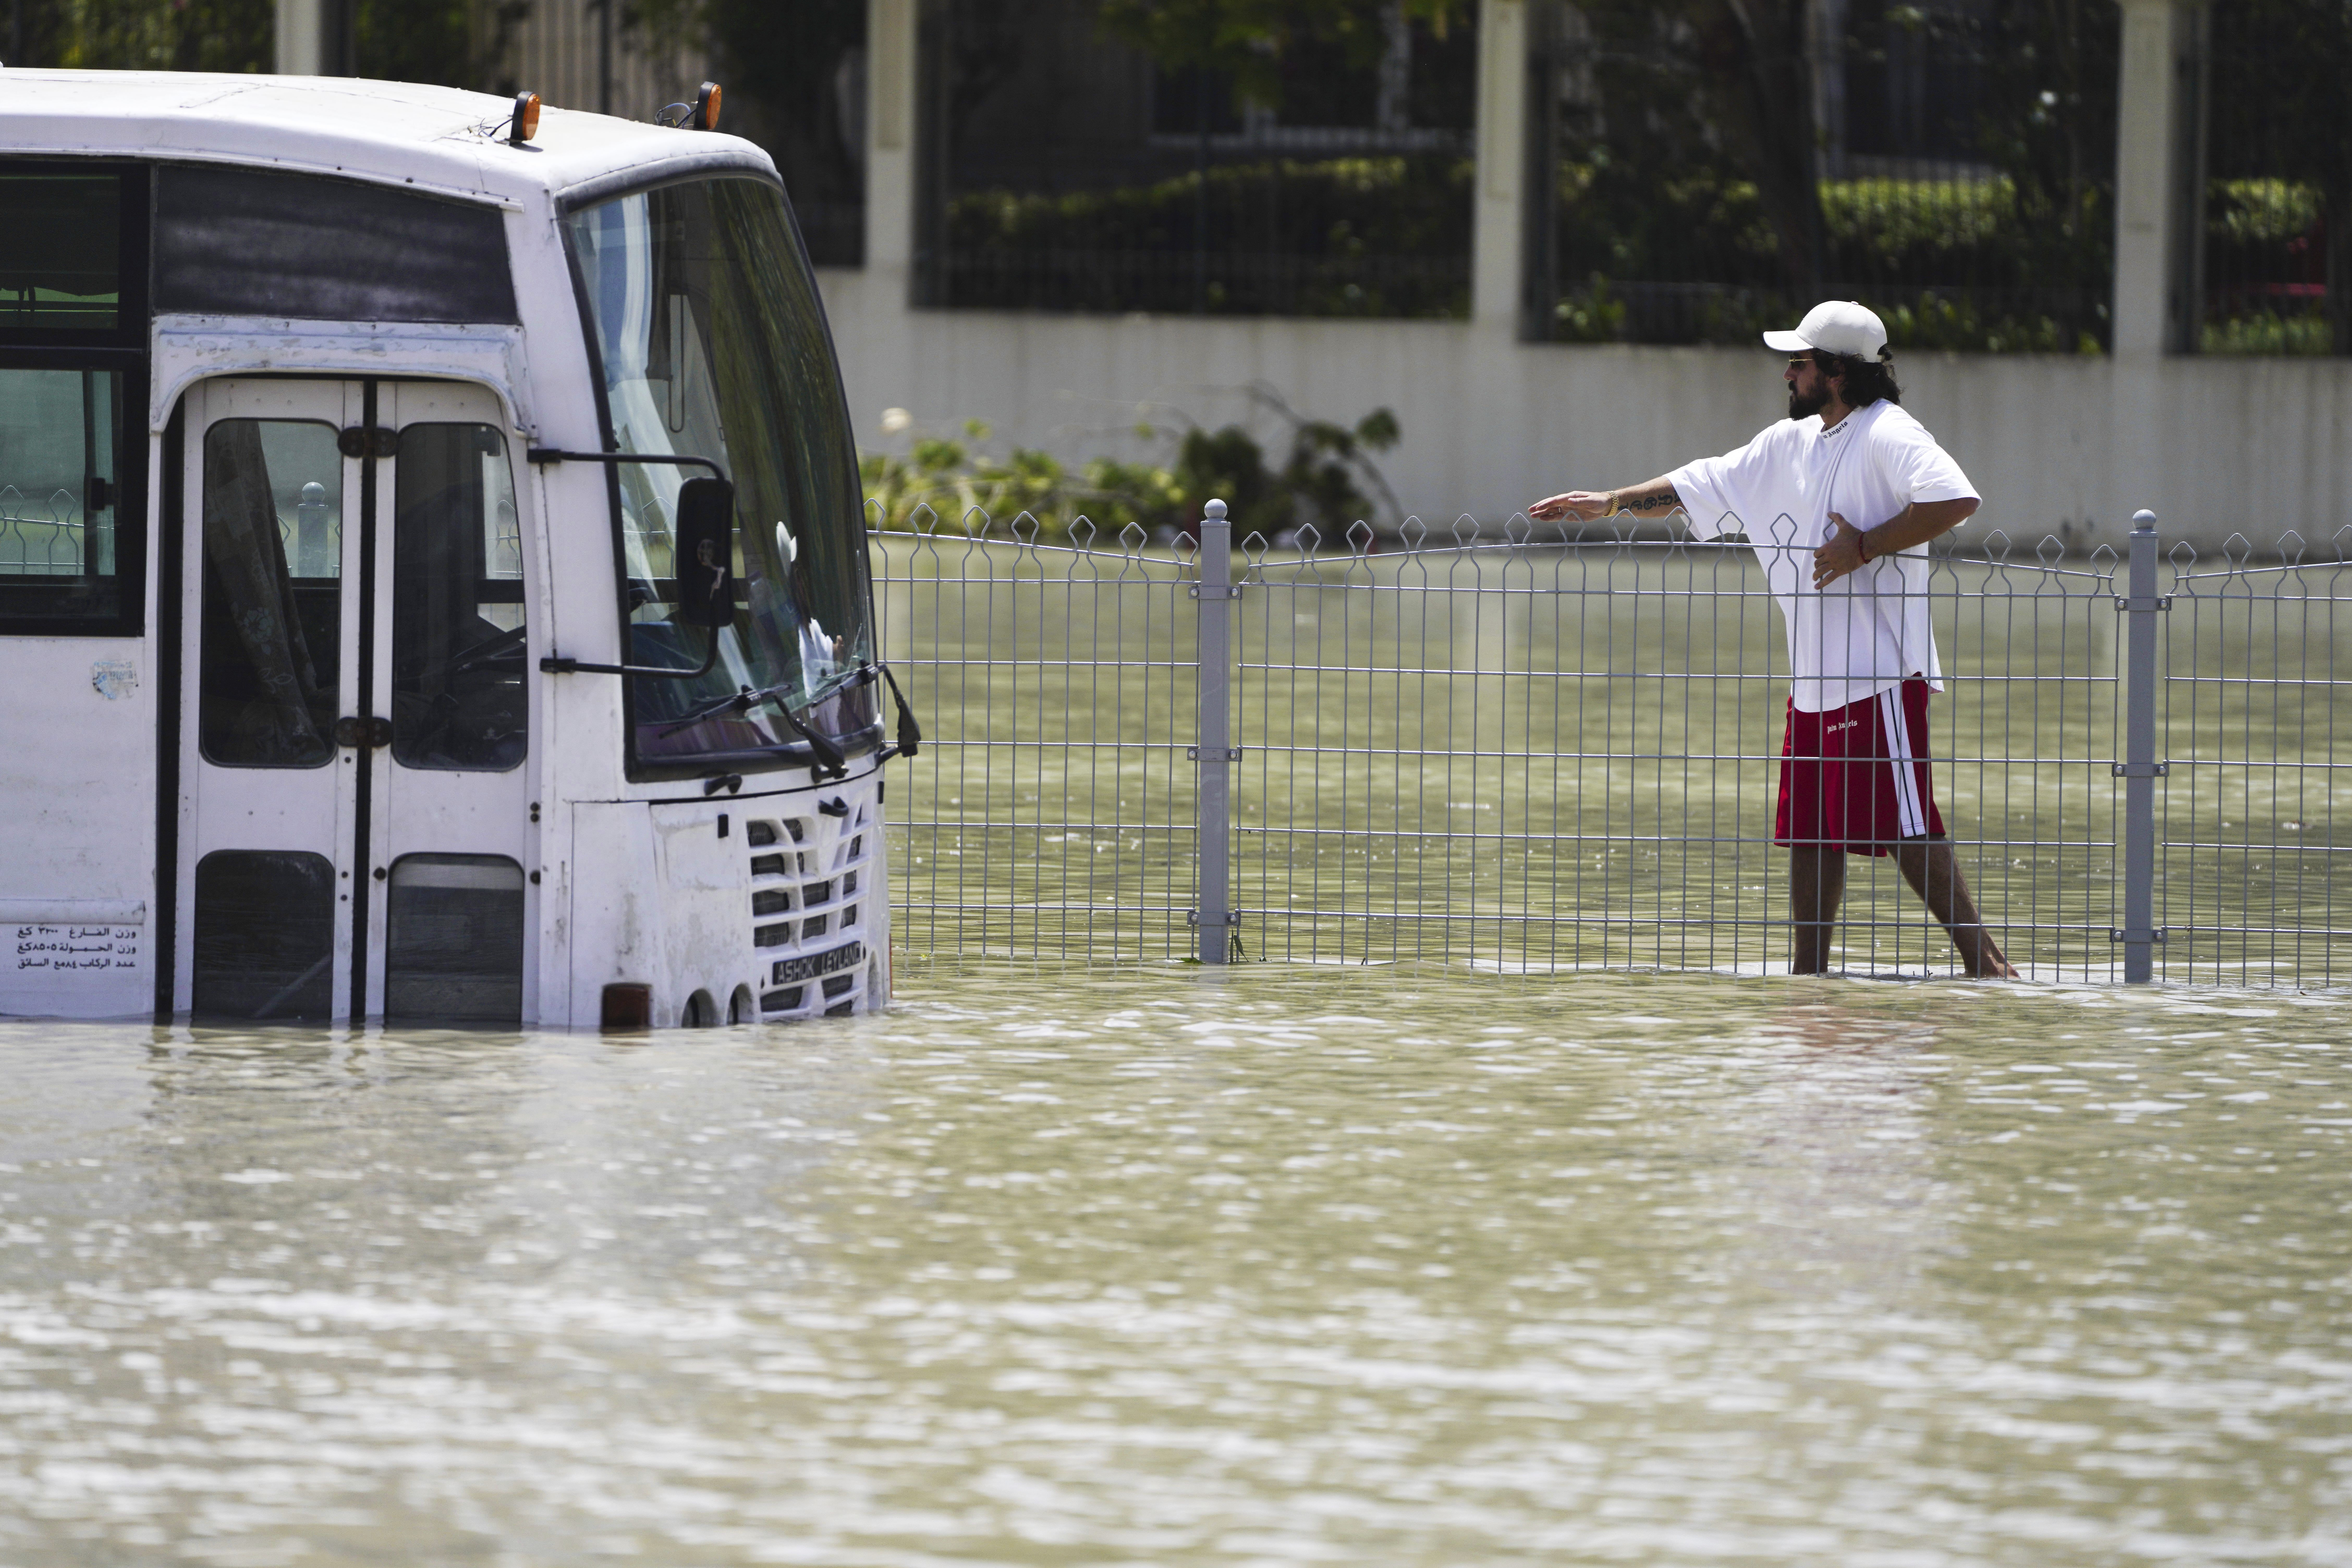 Dubai airport says flood recovery ‘will take some time’ after record rain